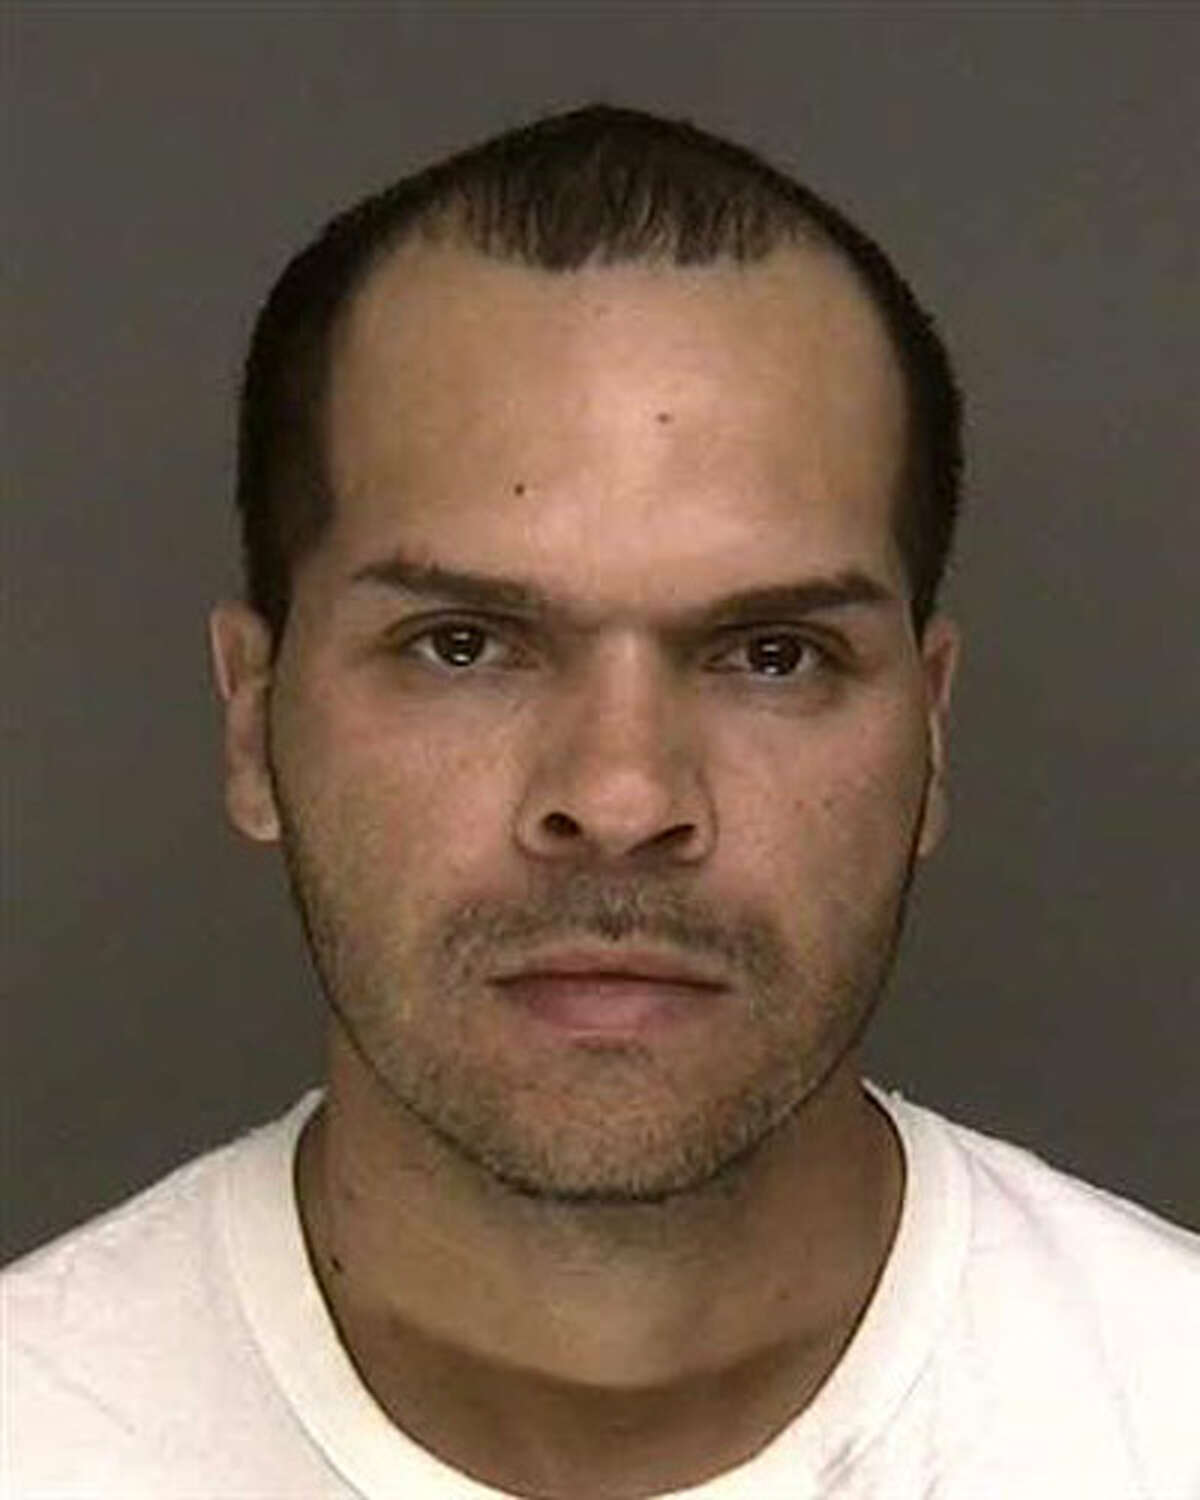 Santos Roman, 35, of Kossuth St. in Bridgeport, Conn., was charged with risk of injury to a minor, possession of narcotics, sale of narcotics and possession of narcotics within 1,500 feet of a school on Monday April 9, 2012. During the brief appearance in Superior Court on Tuesday April 10, 2012, Senior Assistant State’s Attorney Nicholas Bove urged Superior Court Judge Earl Richard ordered Santos held in lieu of $100,000 bond.